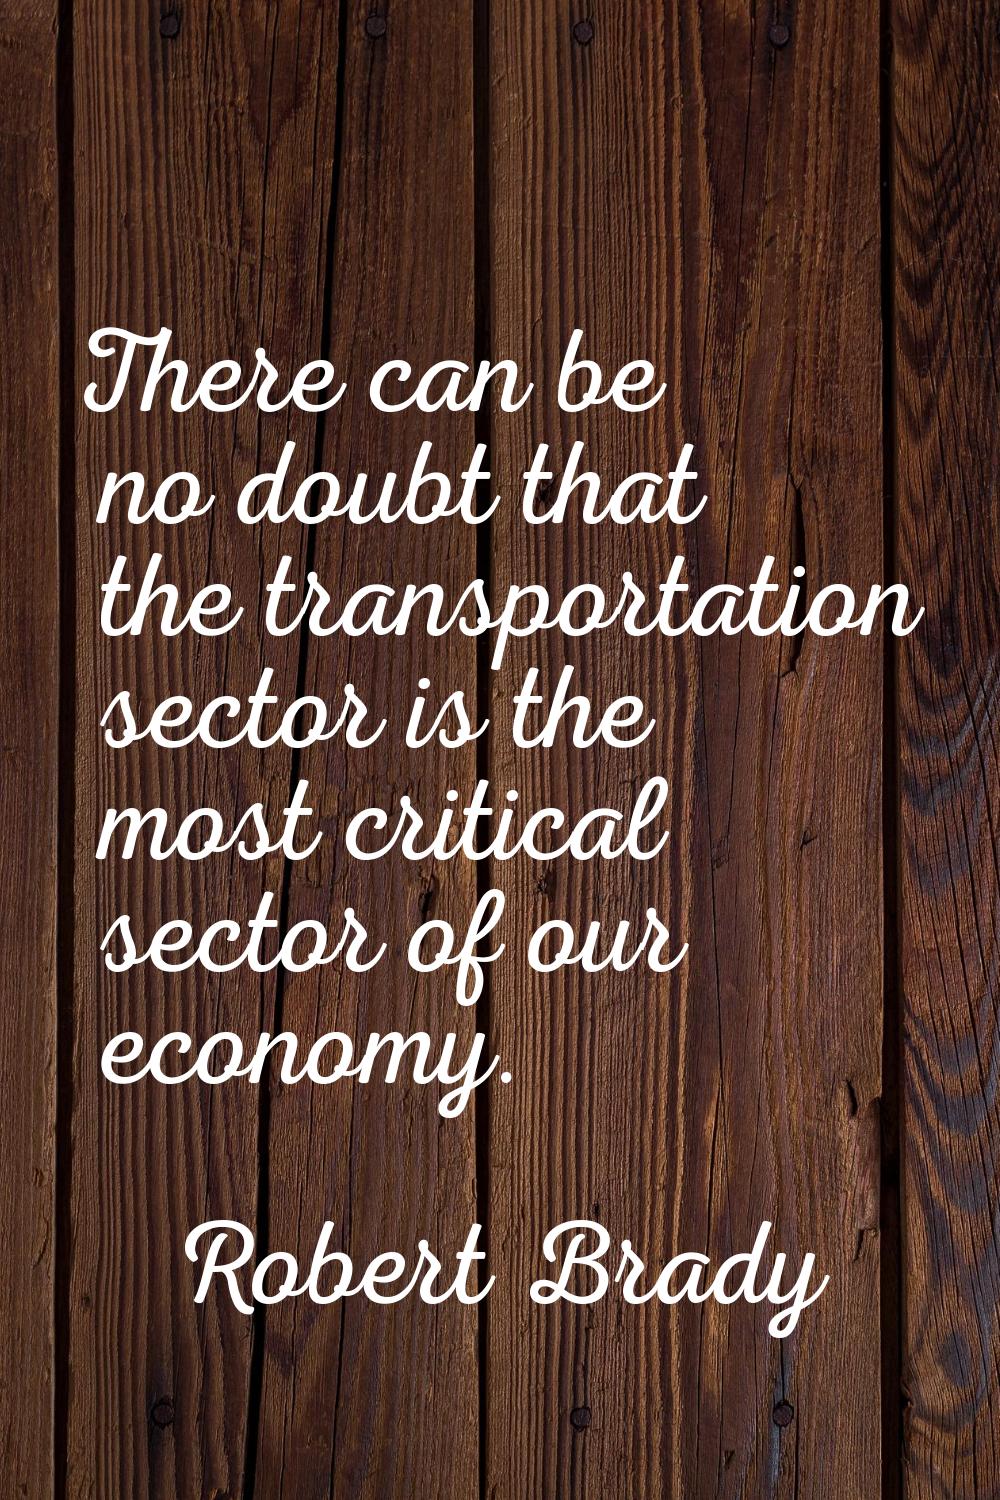 There can be no doubt that the transportation sector is the most critical sector of our economy.